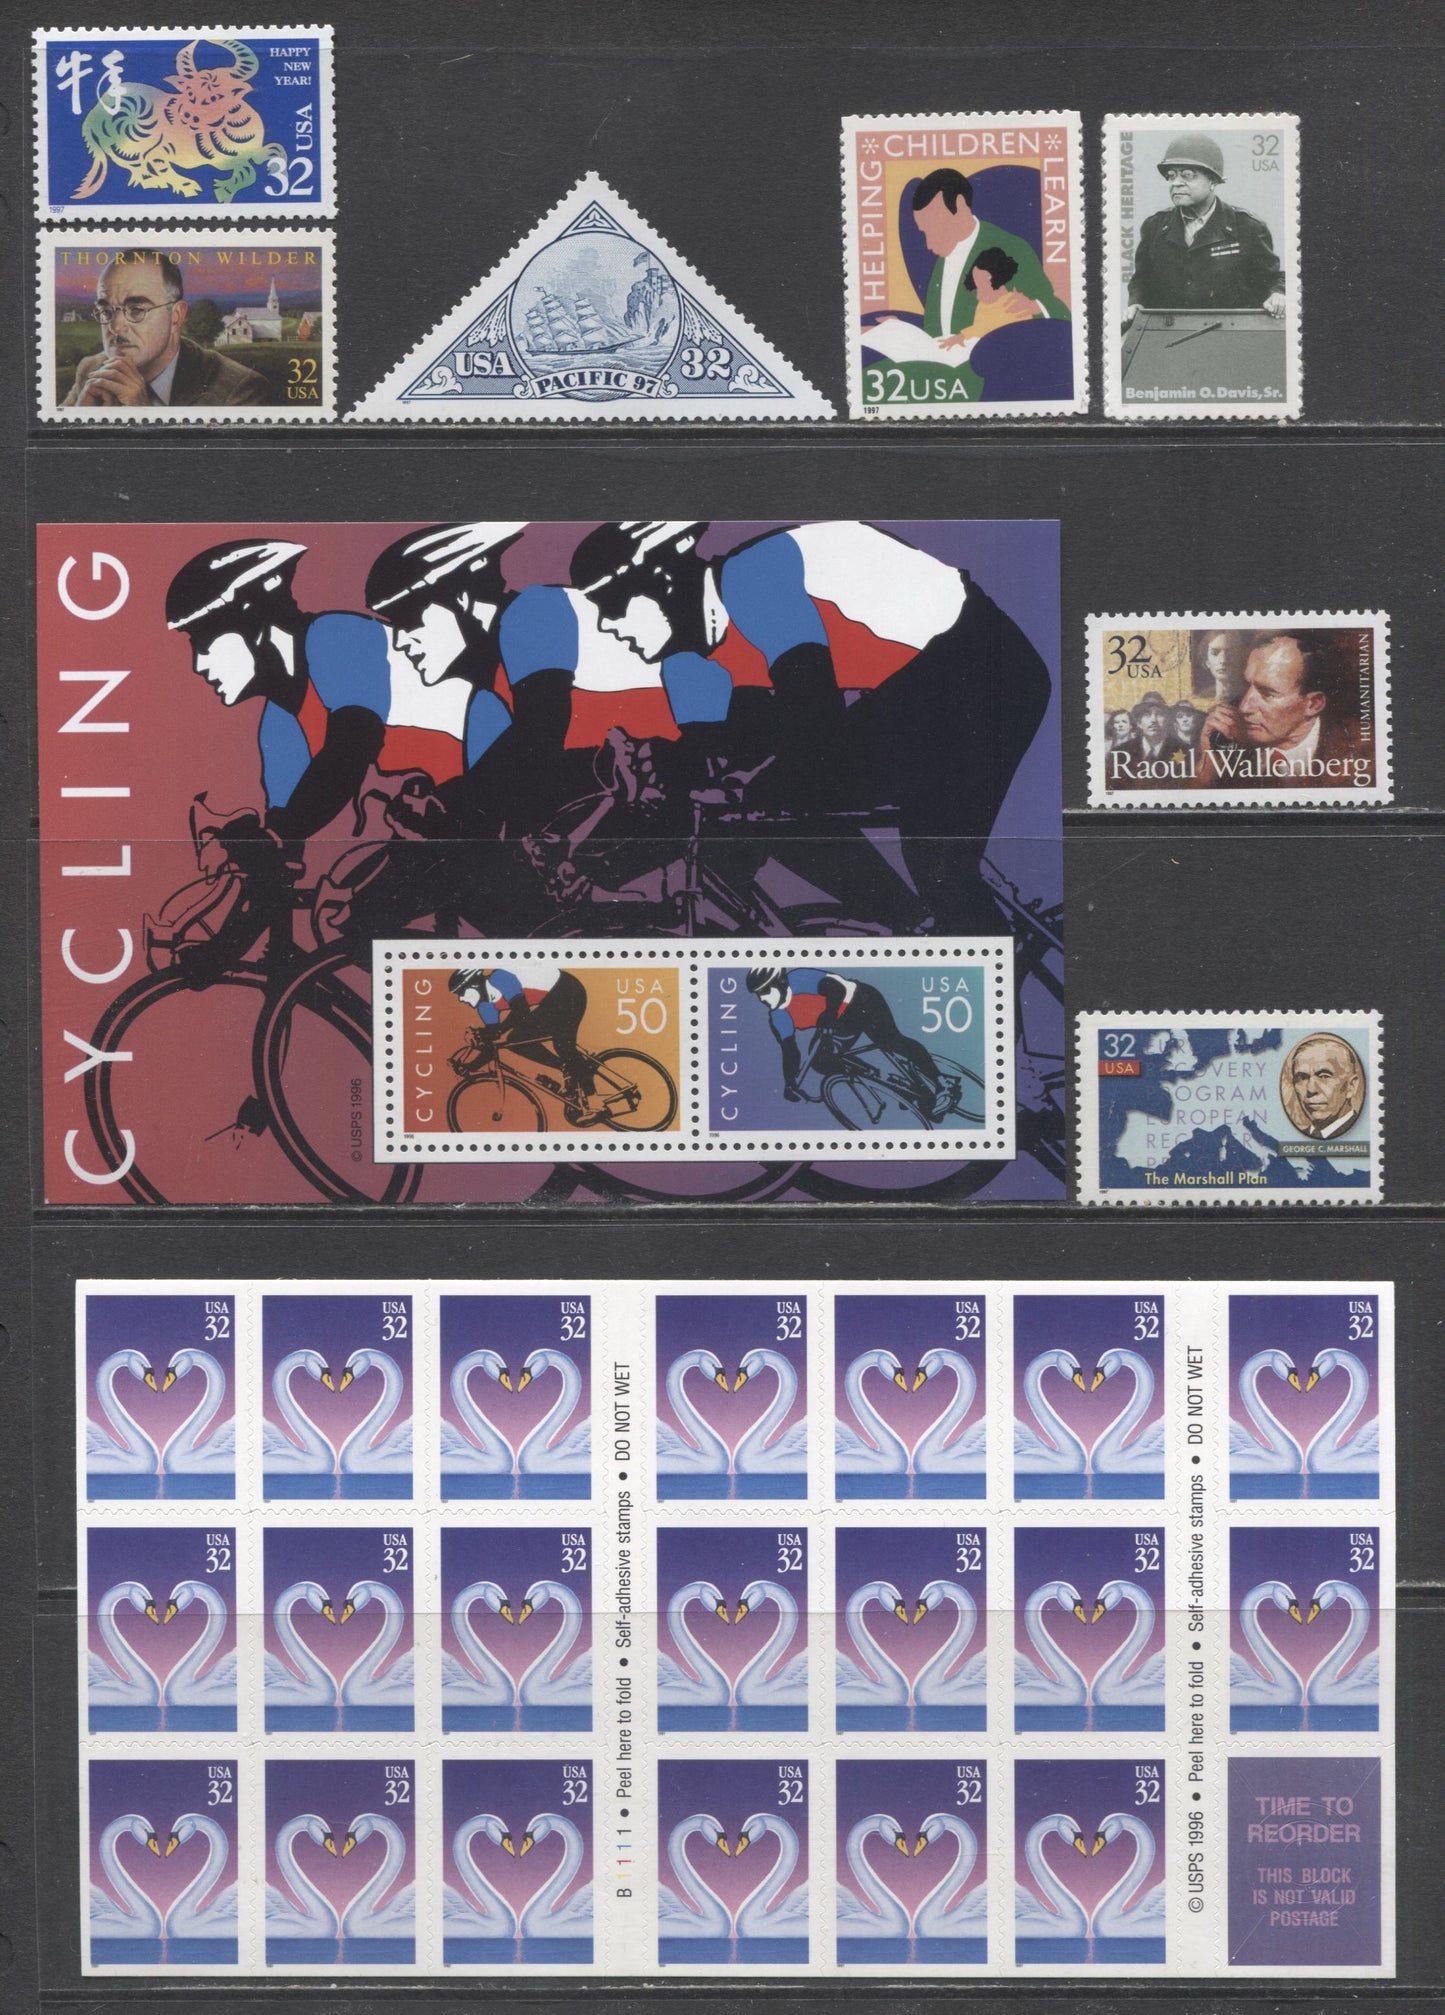 Lot 69 United States SC#3119/3141 1996-1997 Cycling, Chinese New Year, Black Heritage, Helping Children Learn, Pacific 97, Literary Arts, Wallenberg, Marshall Plan & Love Issues, 9 VFNH Singles, Booklet Of 20 & Souvenir Sheet, 2017 Scott Cat. $20.5